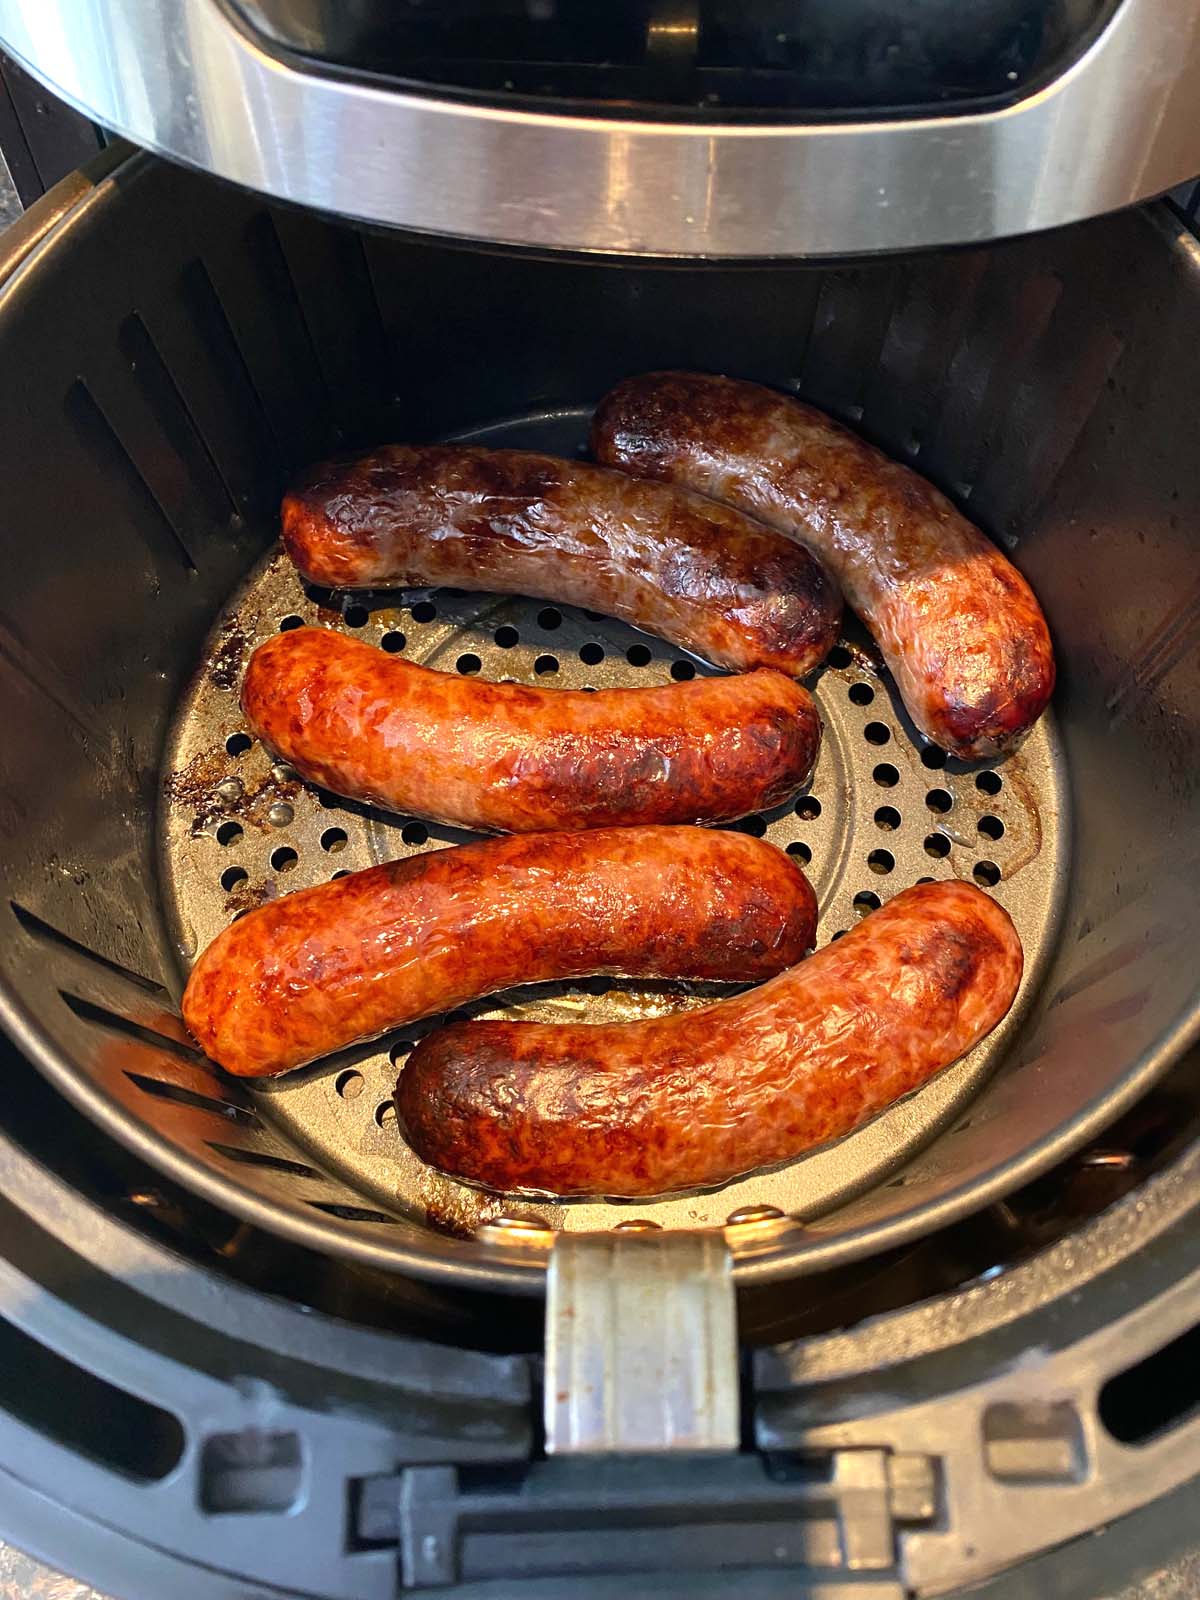 Cooked bratwurst in an air fryer.